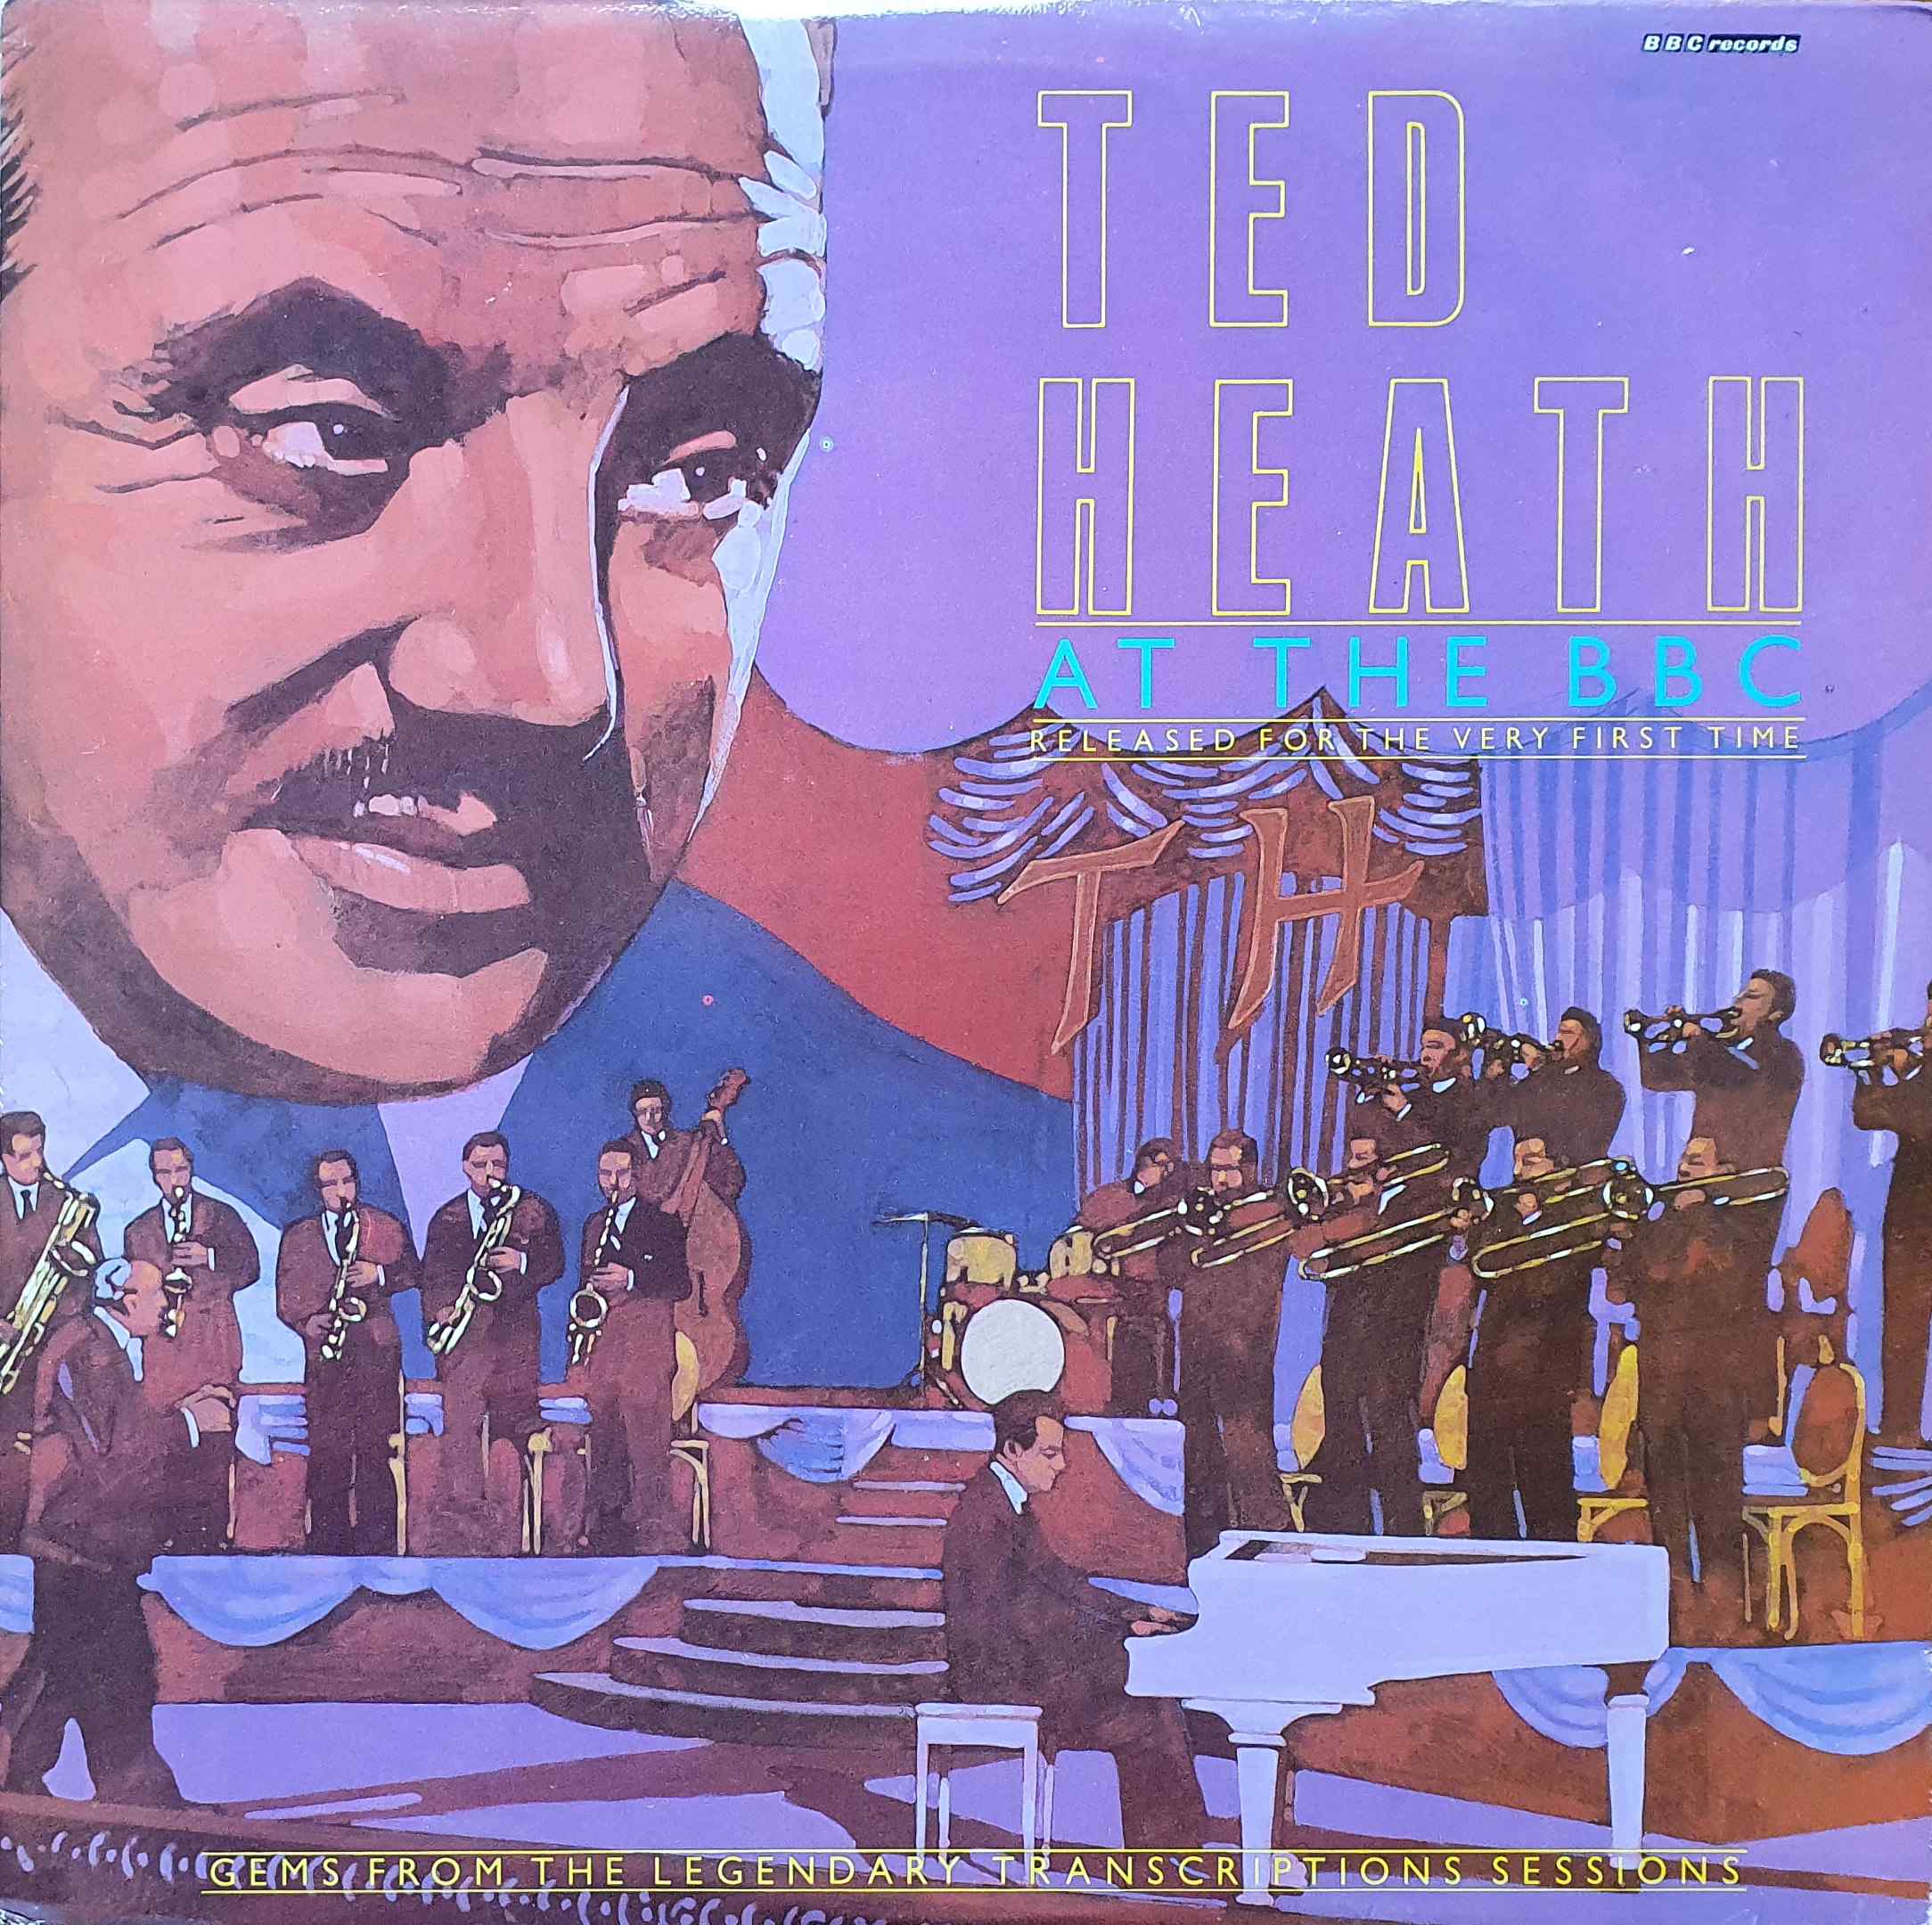 Picture of HRC - 1060 Ted Heath at the BBC by artist Ted Heath from the BBC albums - Records and Tapes library